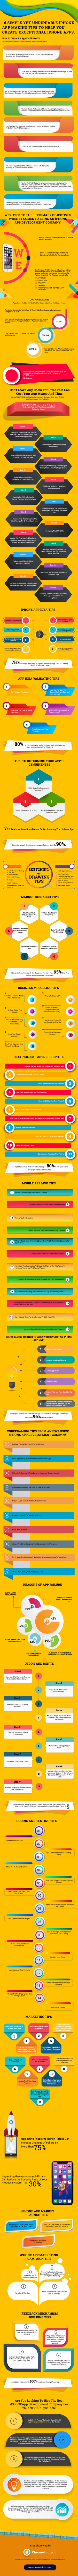 16 Savvy and GoTo iPhone app development tips and techniques - Infographic